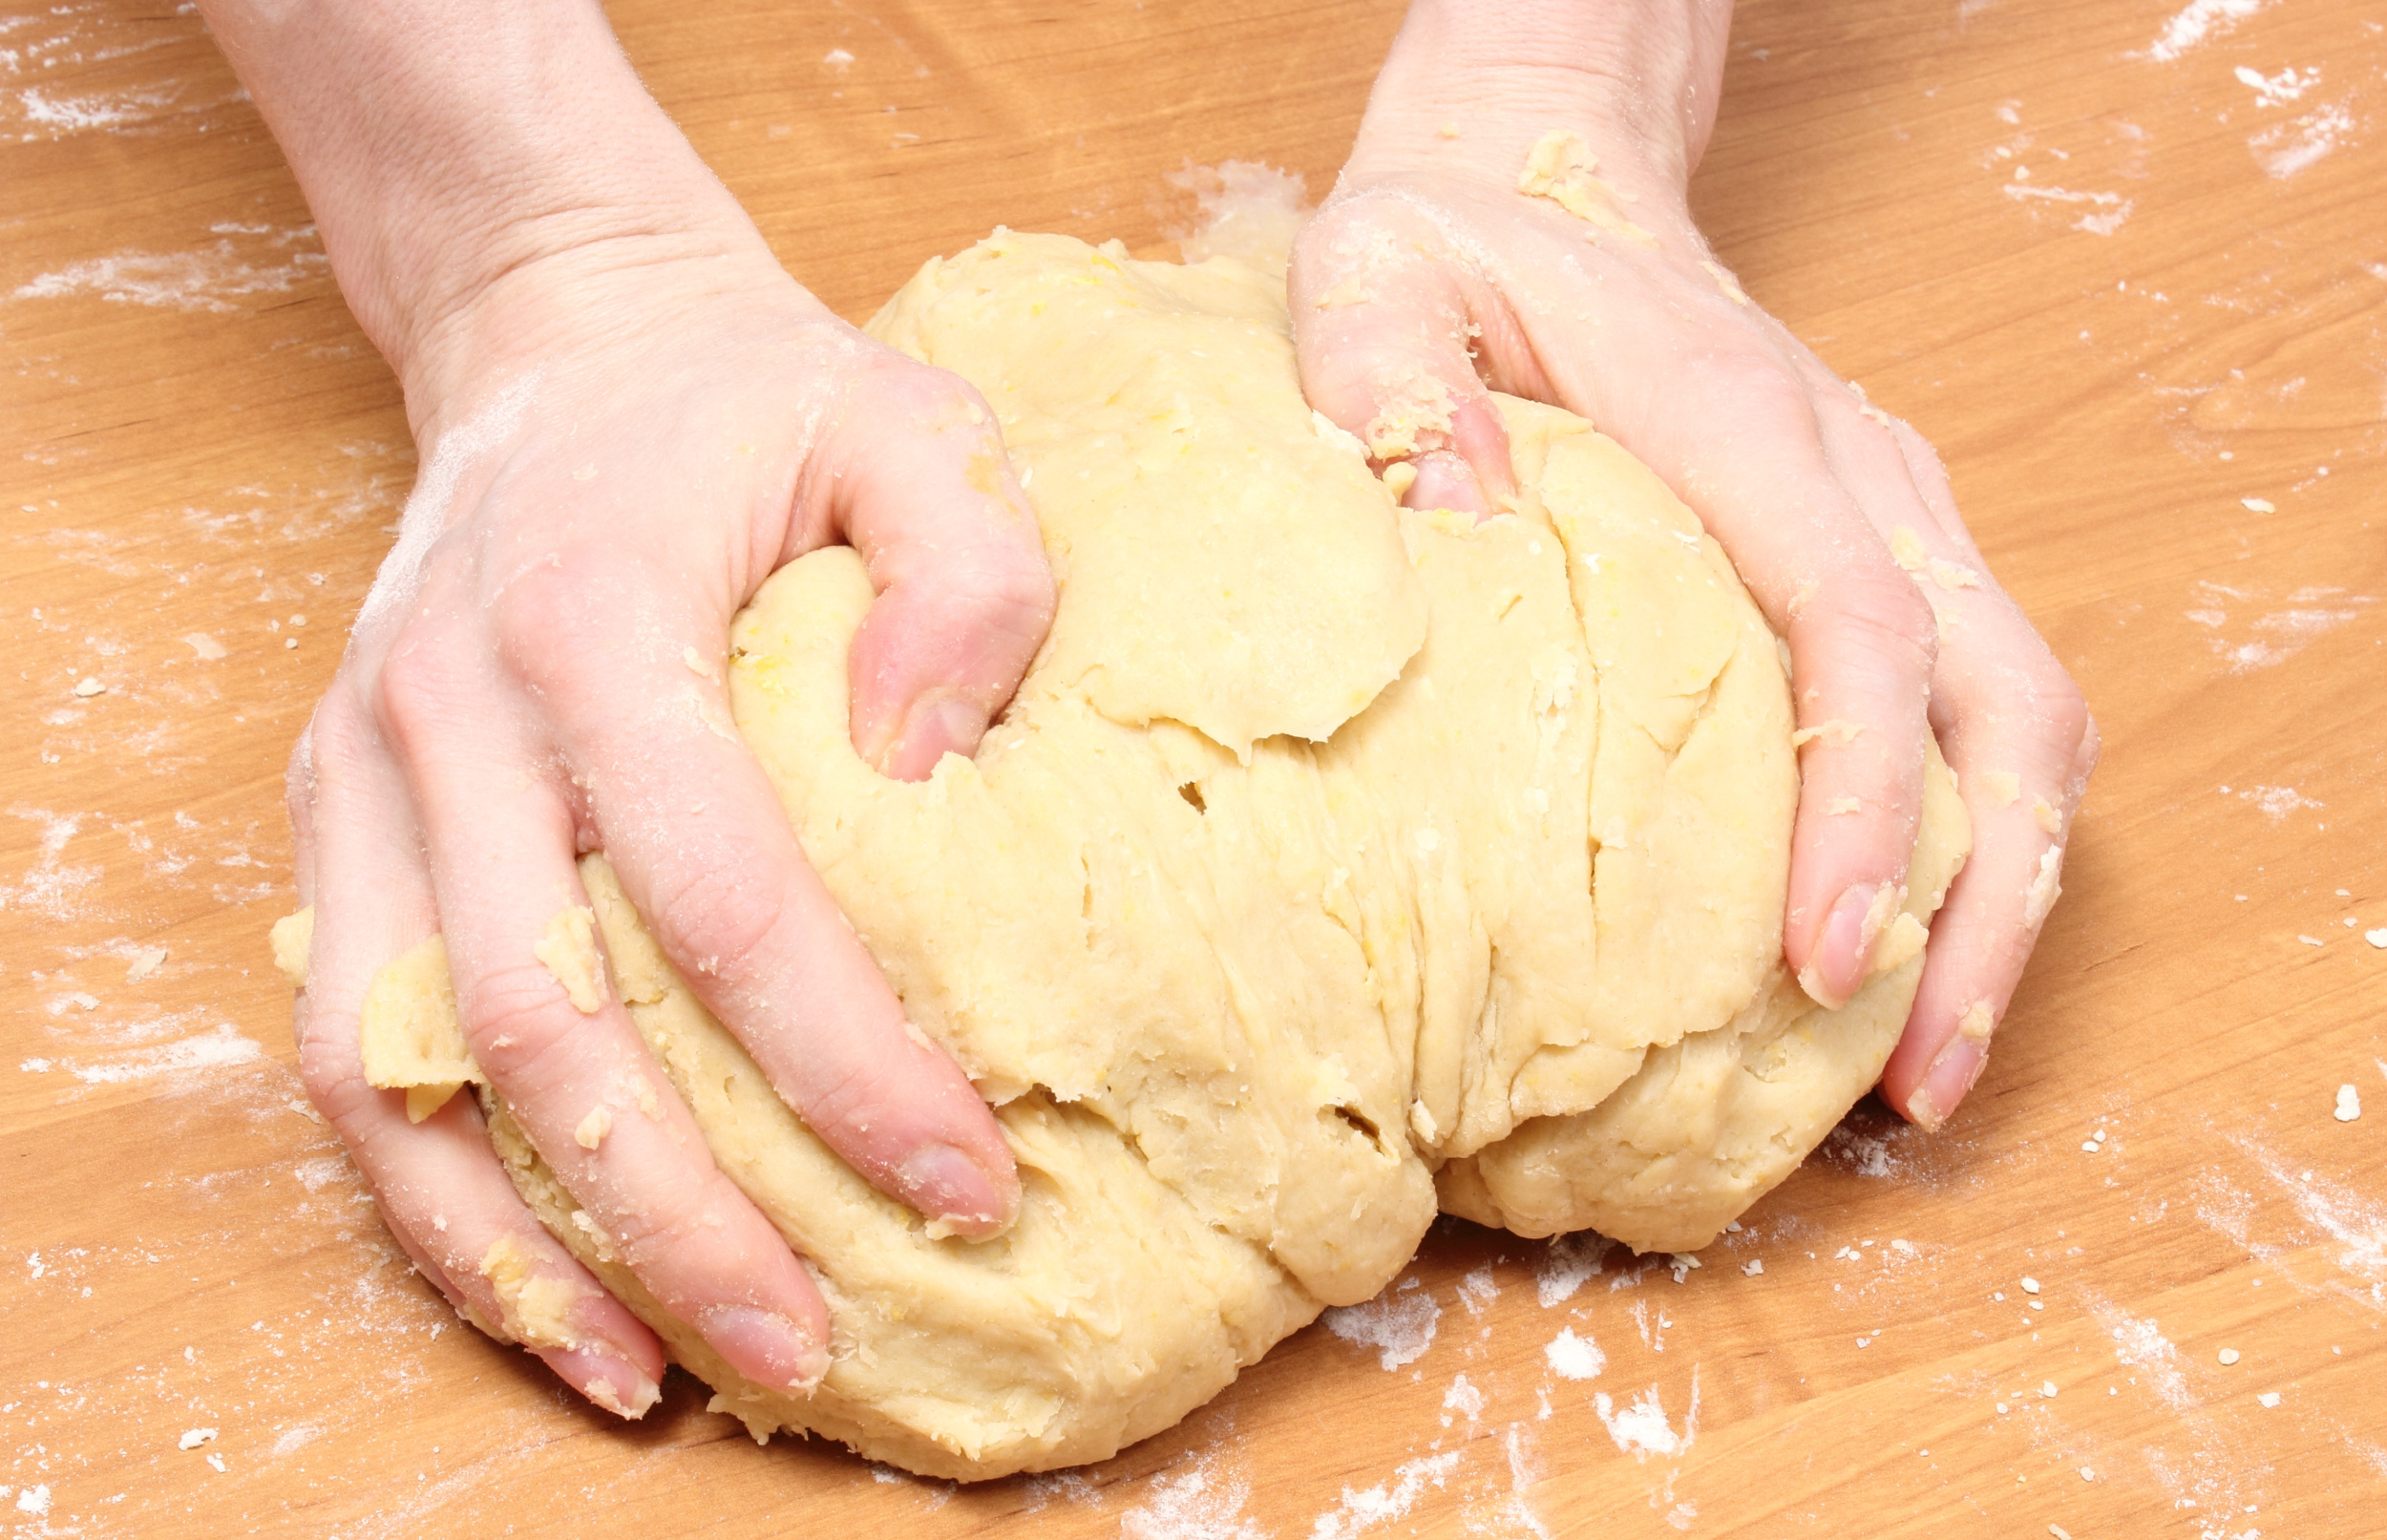 Kneading freezing yeast bread dough on a floured wooden surface.